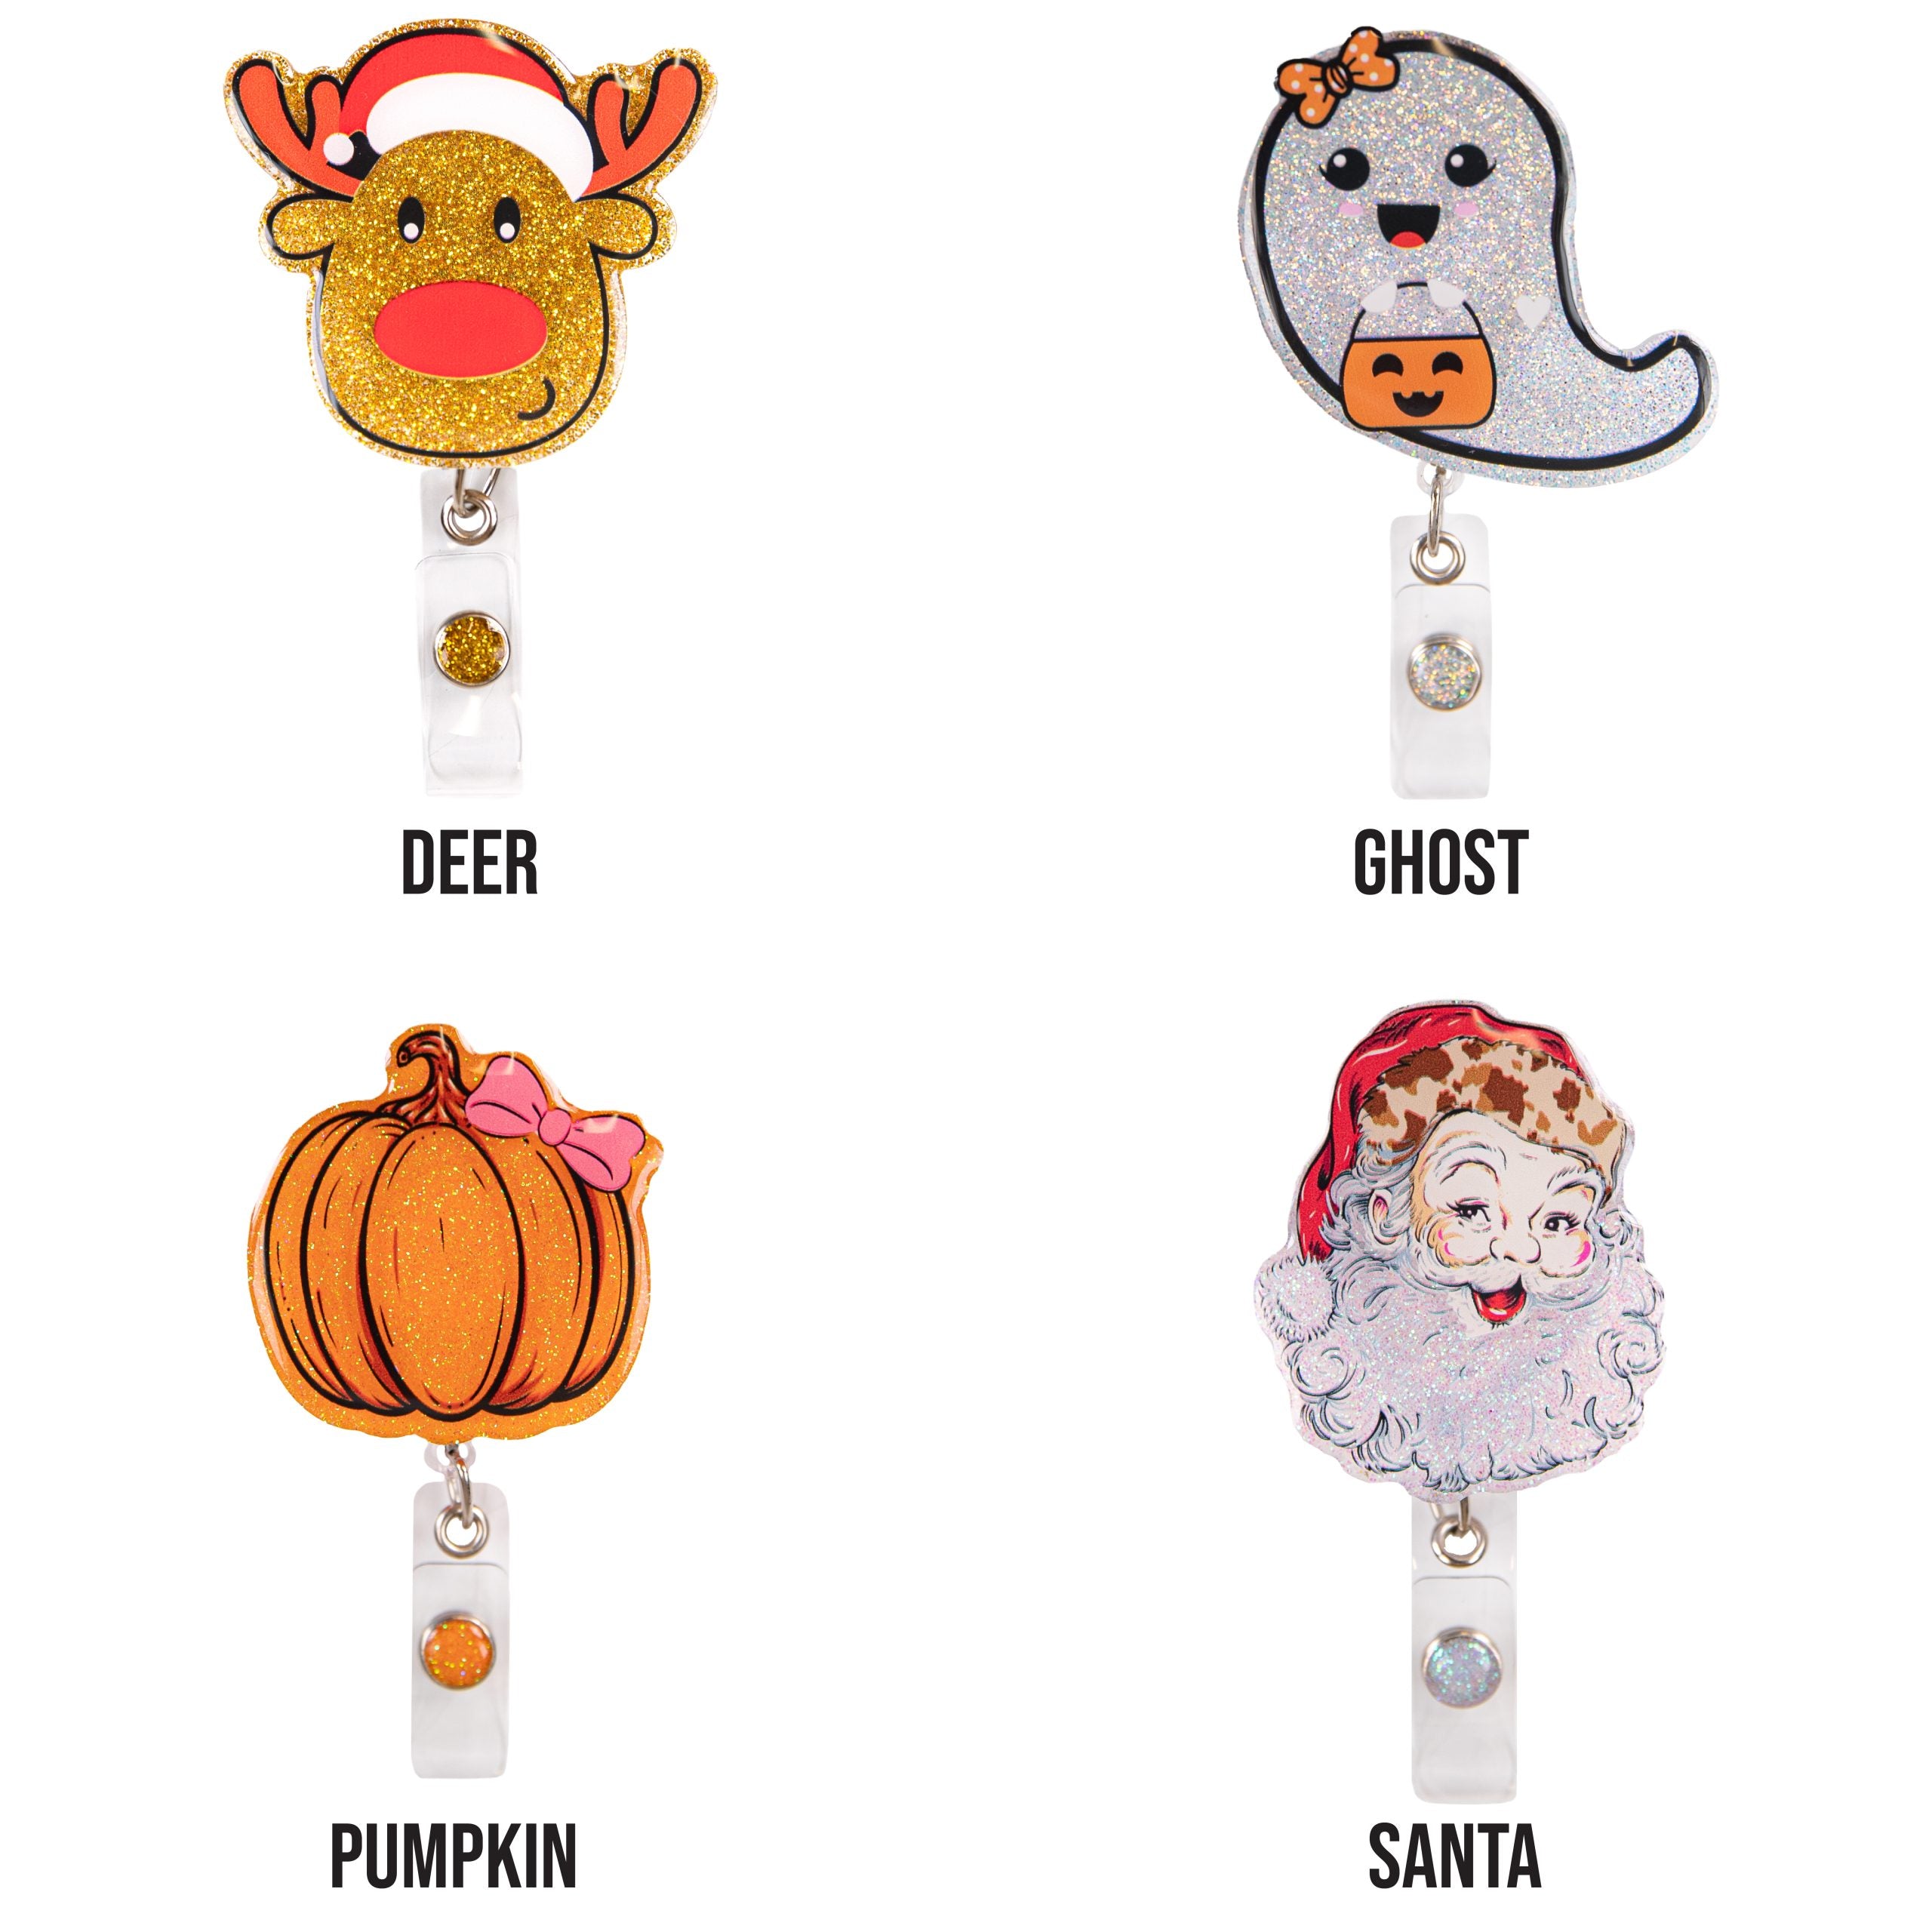 BADGE REELS for the Holidays.